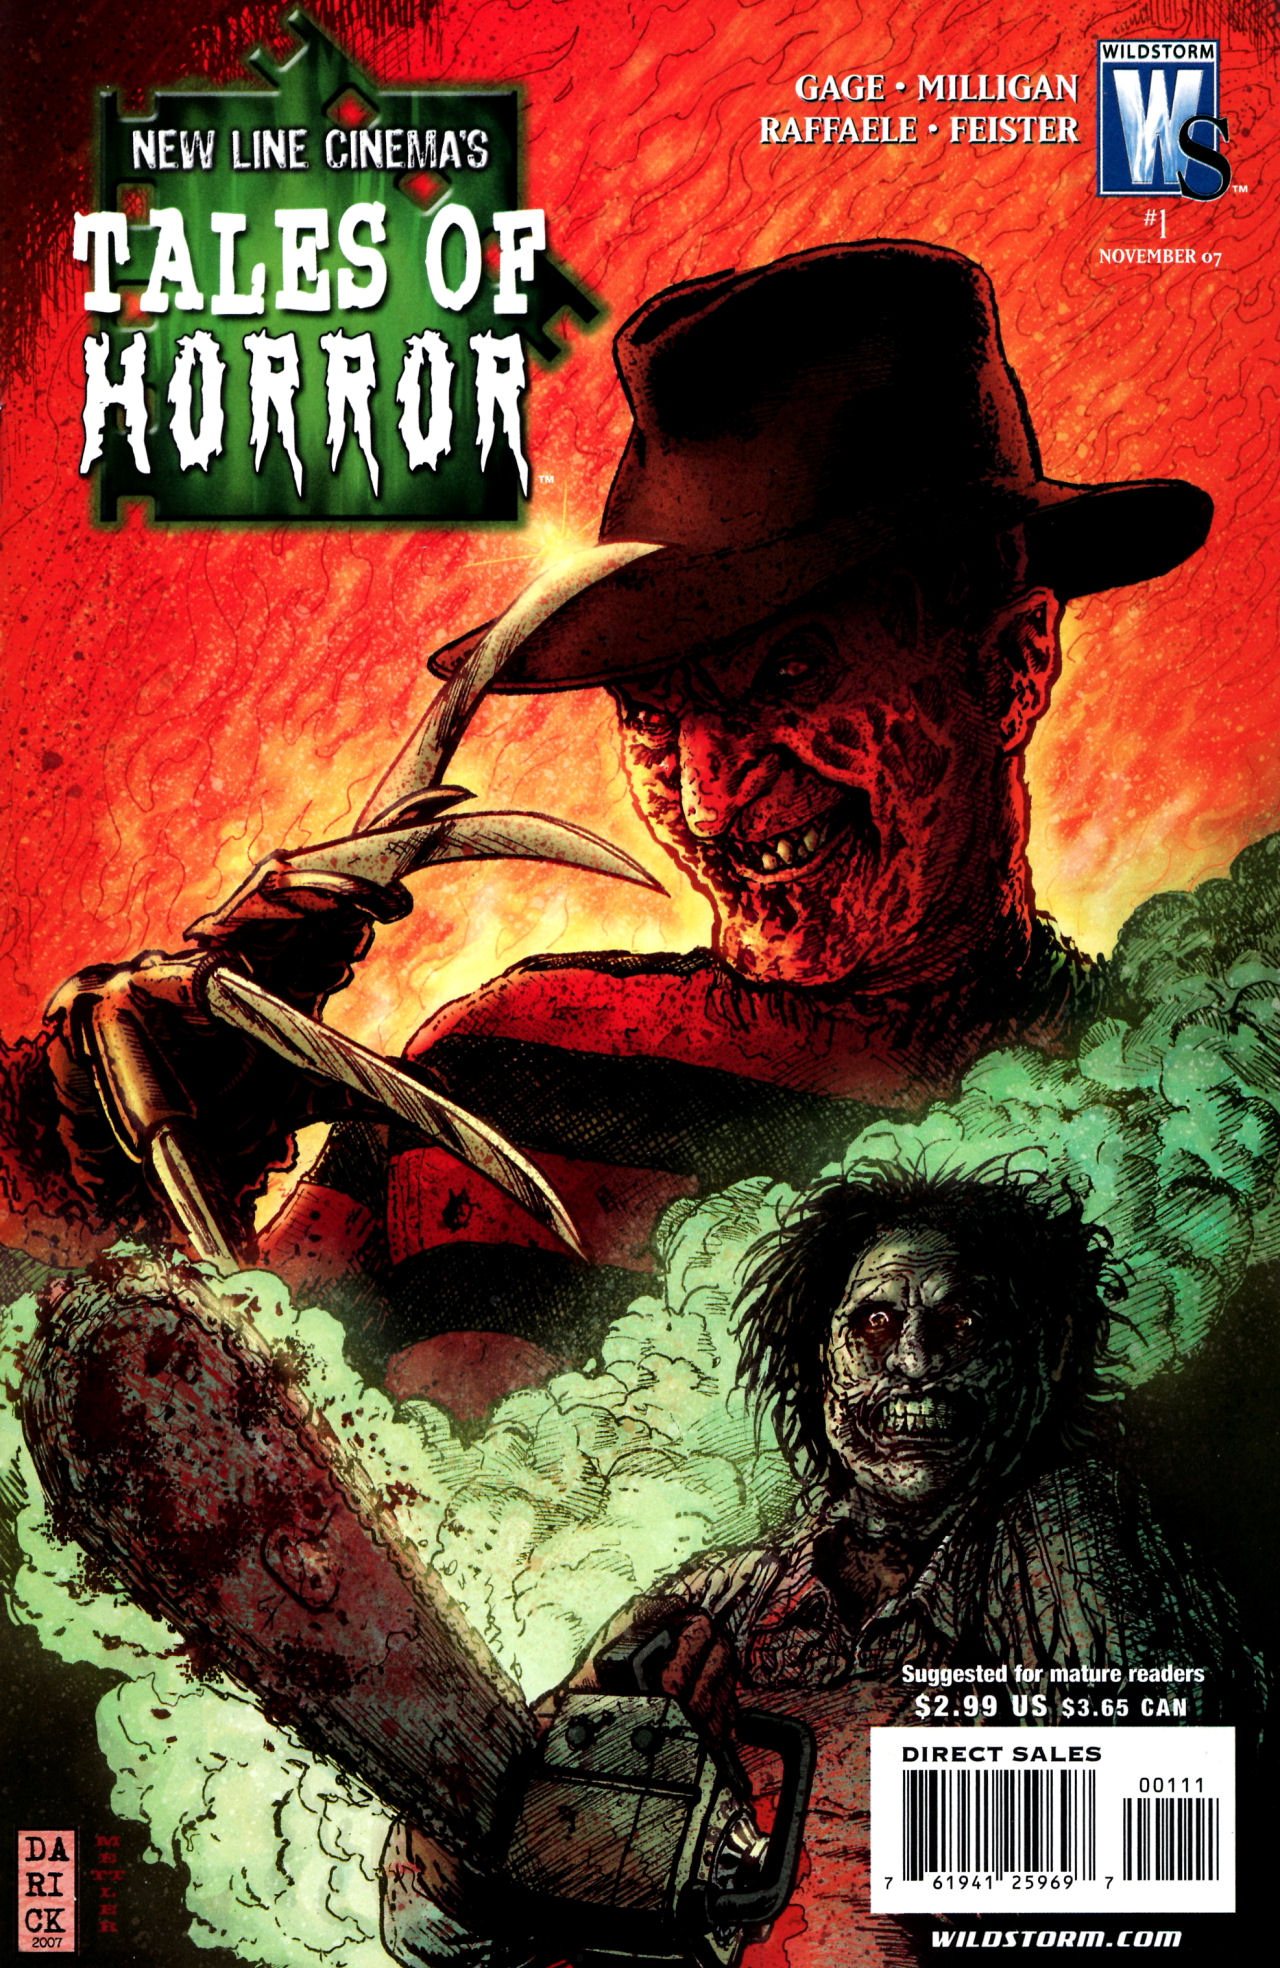 Read online New Line Cinema's Tales of Horror comic -  Issue # Full - 1